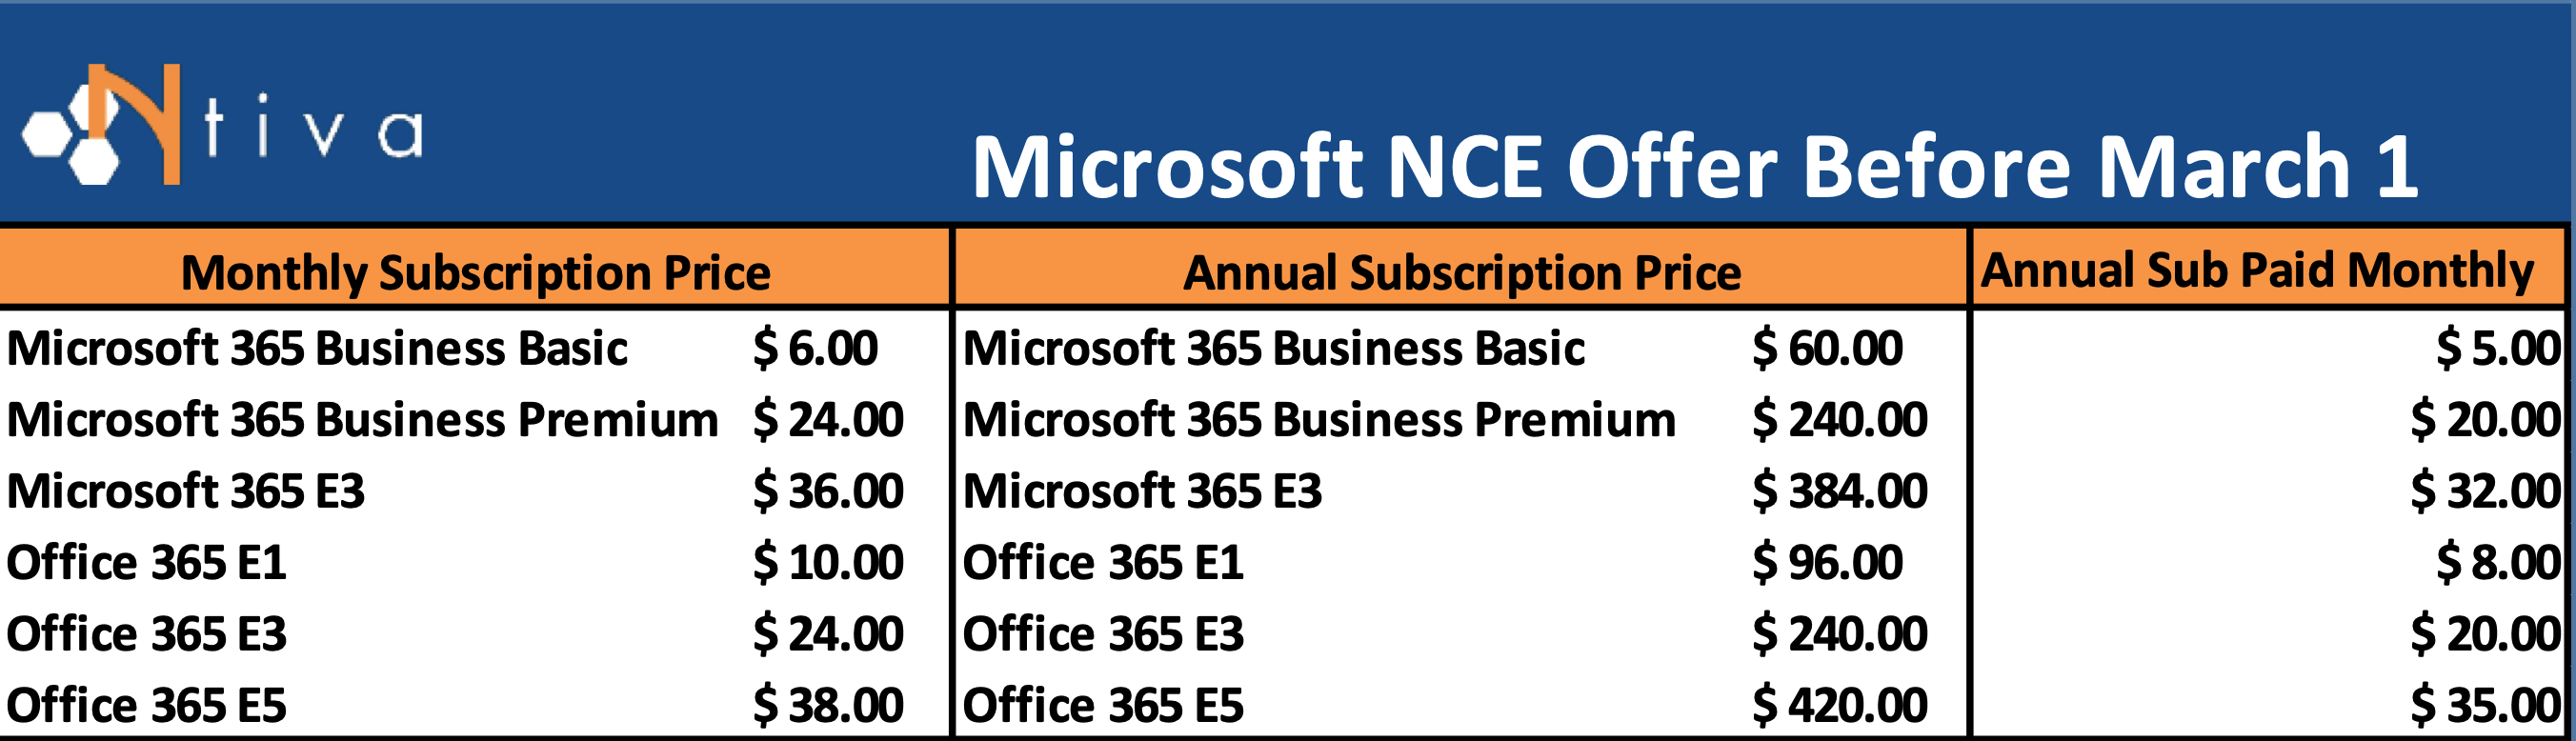 Ntiva Microsoft NCE Offer Before March 2022